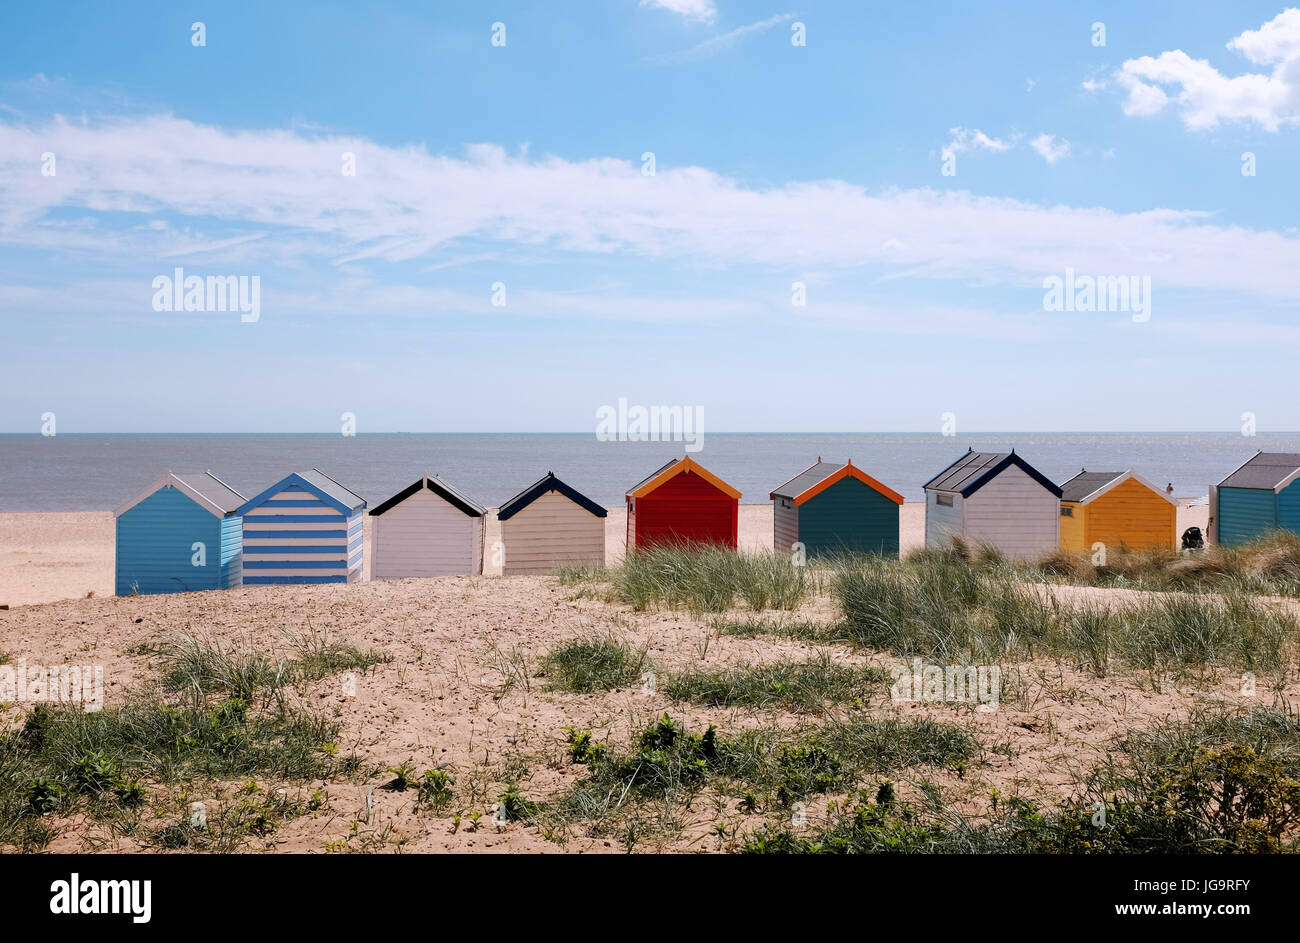 Southwold Suffolk UK June 2017 - Beach huts on the seafront with blue sky Photograph taken by Simon Dack Stock Photo